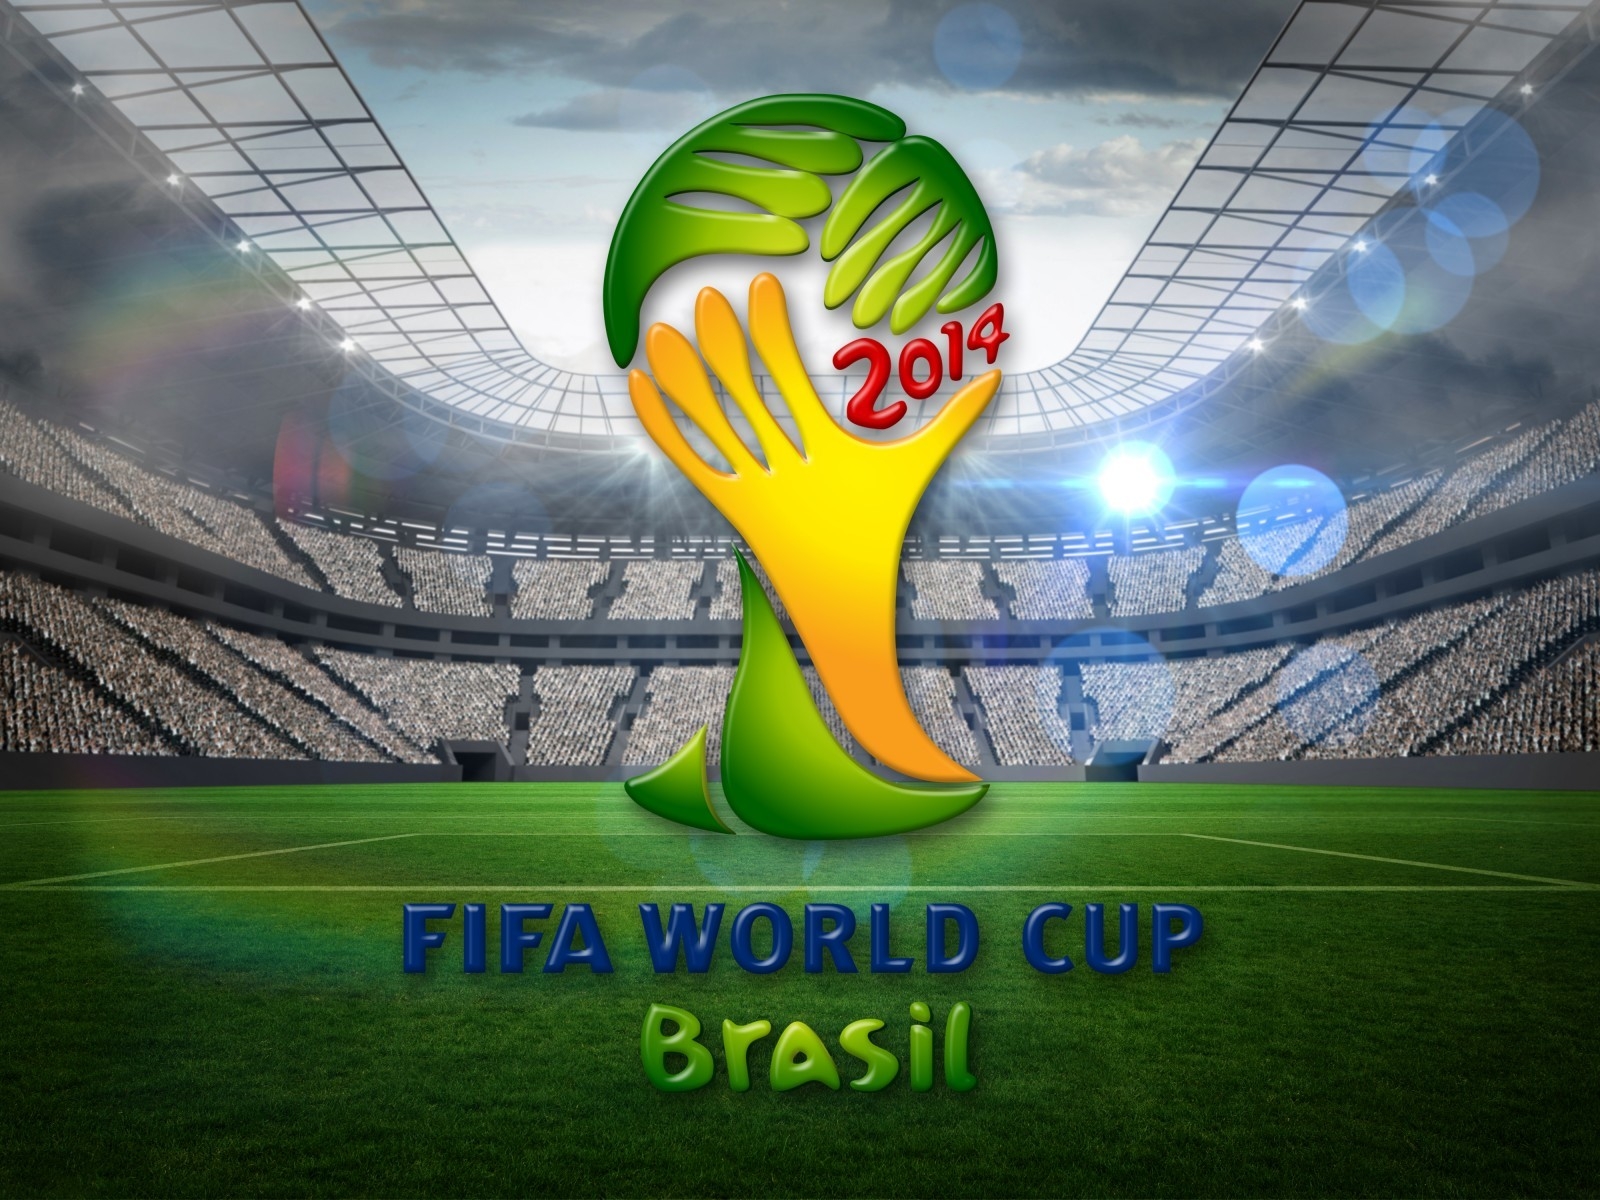 2014 Brasil World Cup for 1600 x 1200 resolution